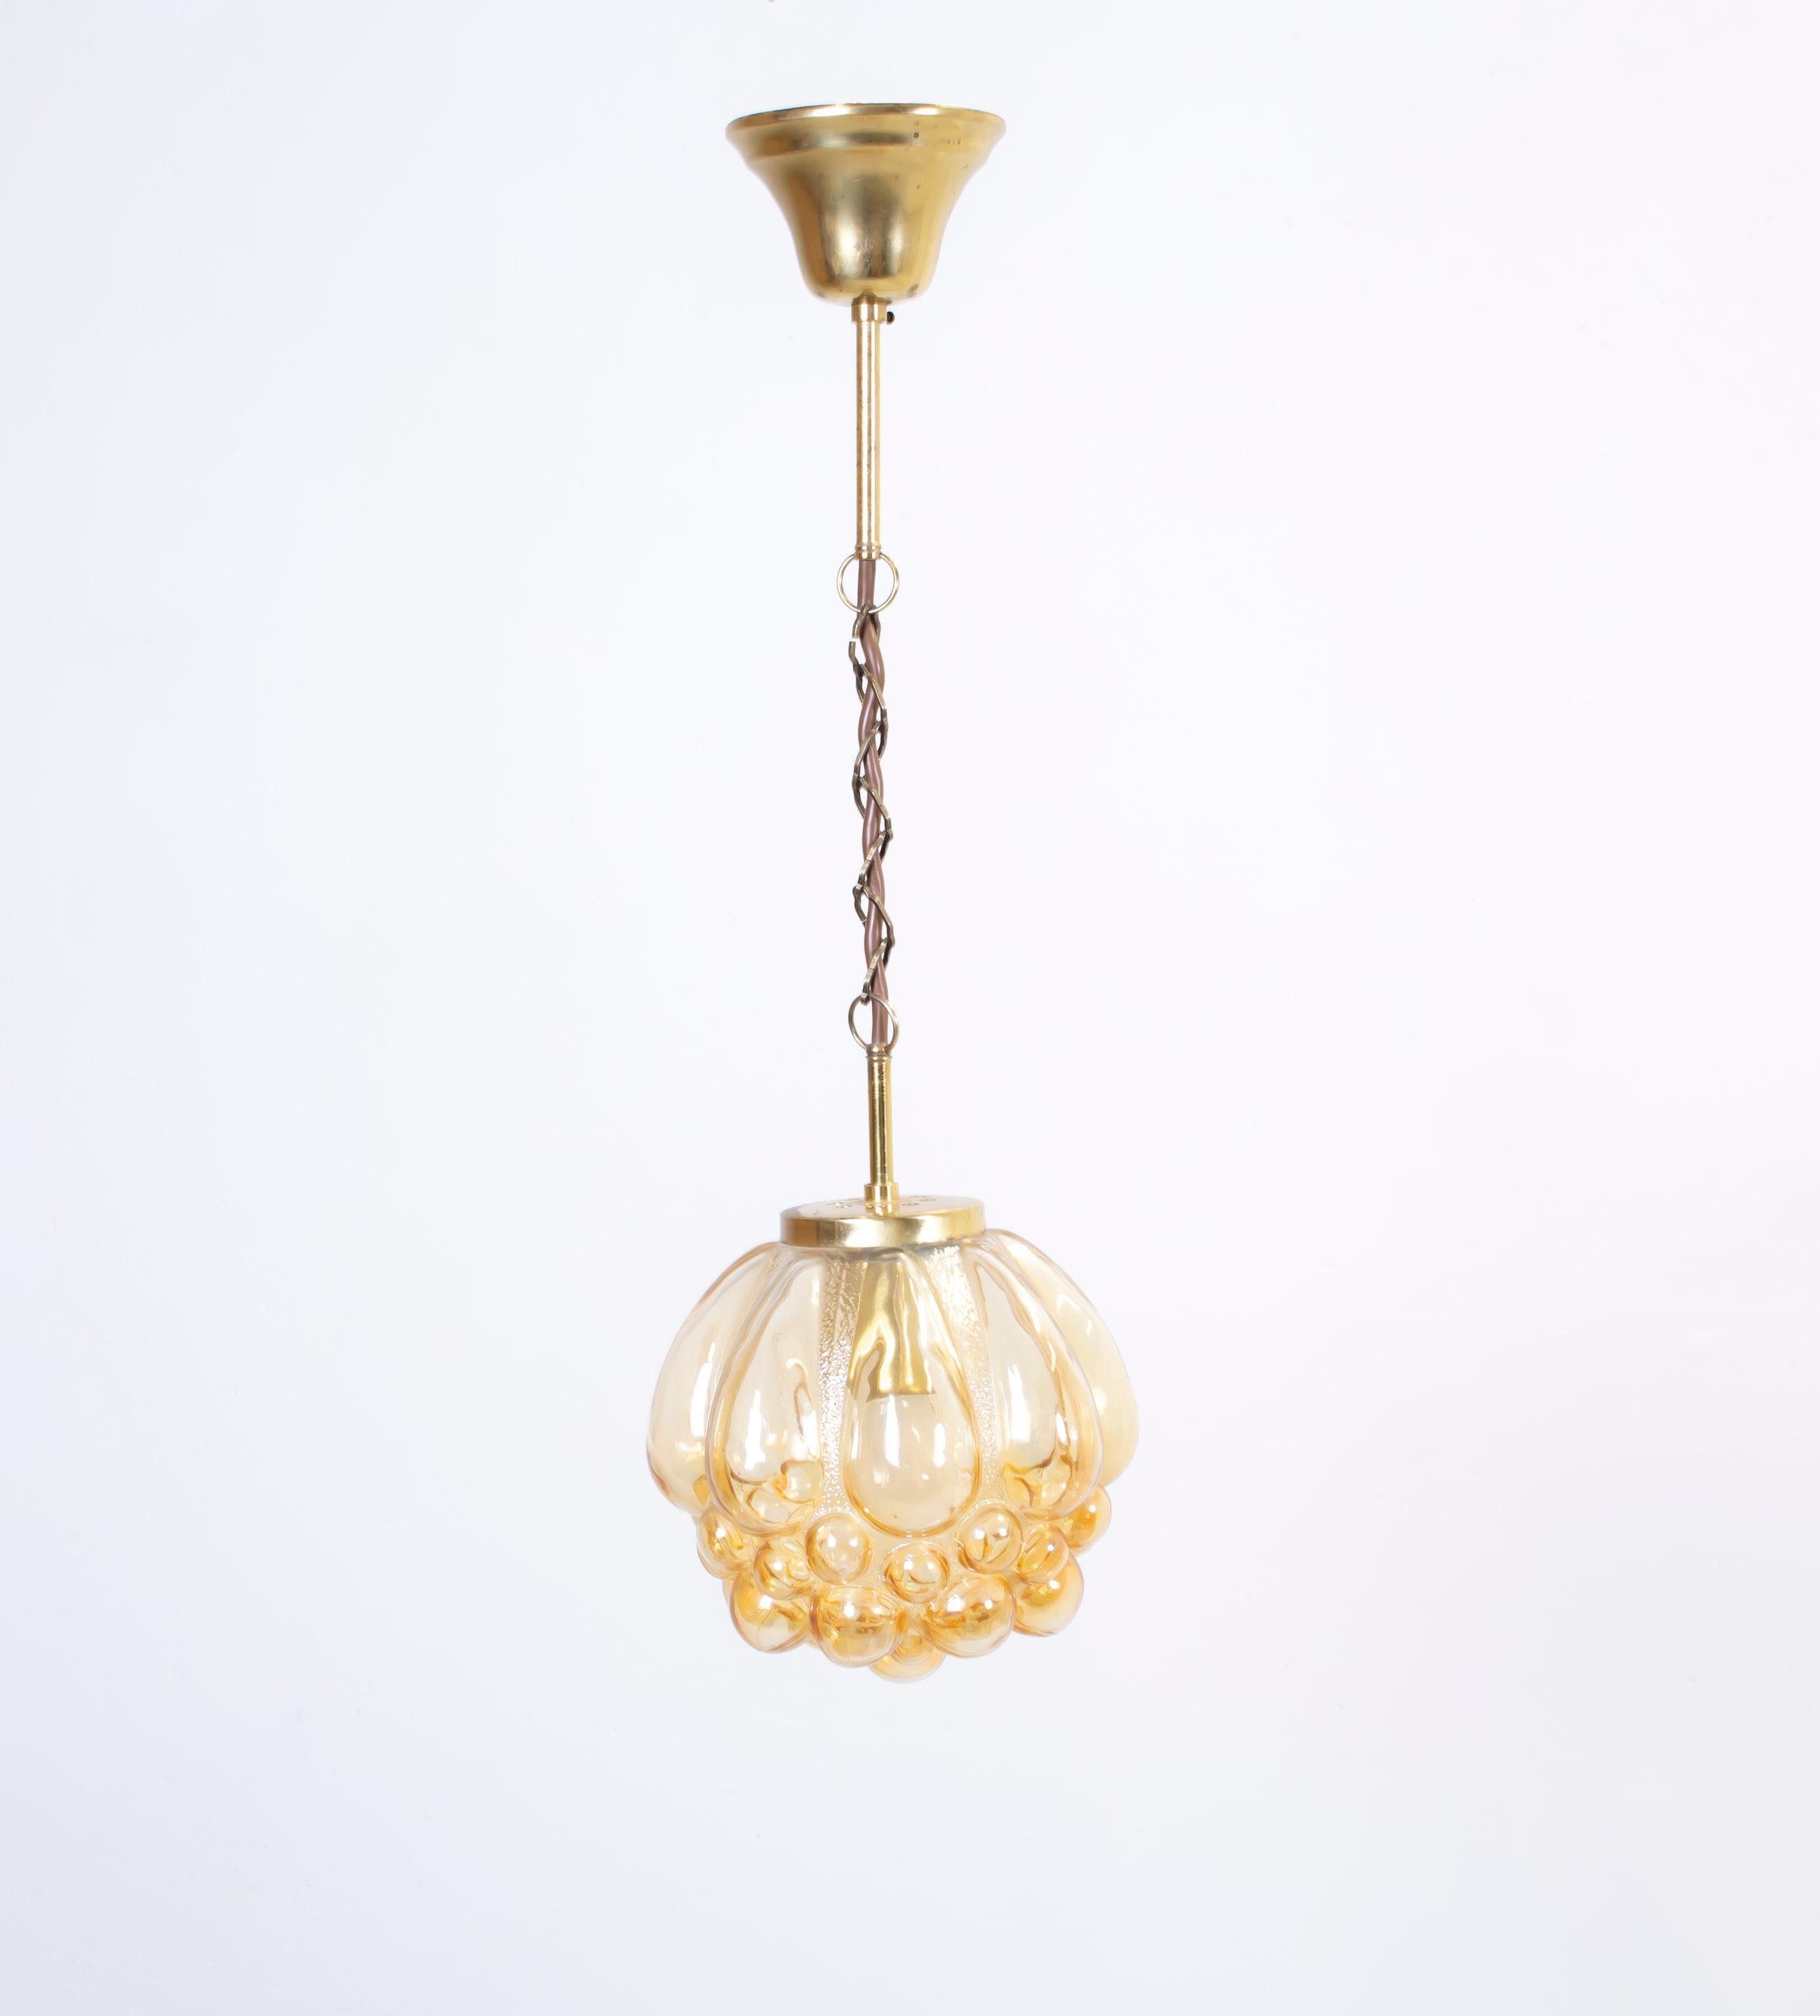 Decorative ceiling lamp in brass with shade in bubble glass. Designed and made in Norway from circa 1970s first half. The lamp is fully working and in good vintage condition. The lamp is fitted with one E27 bulb holder (works in the US), with a max